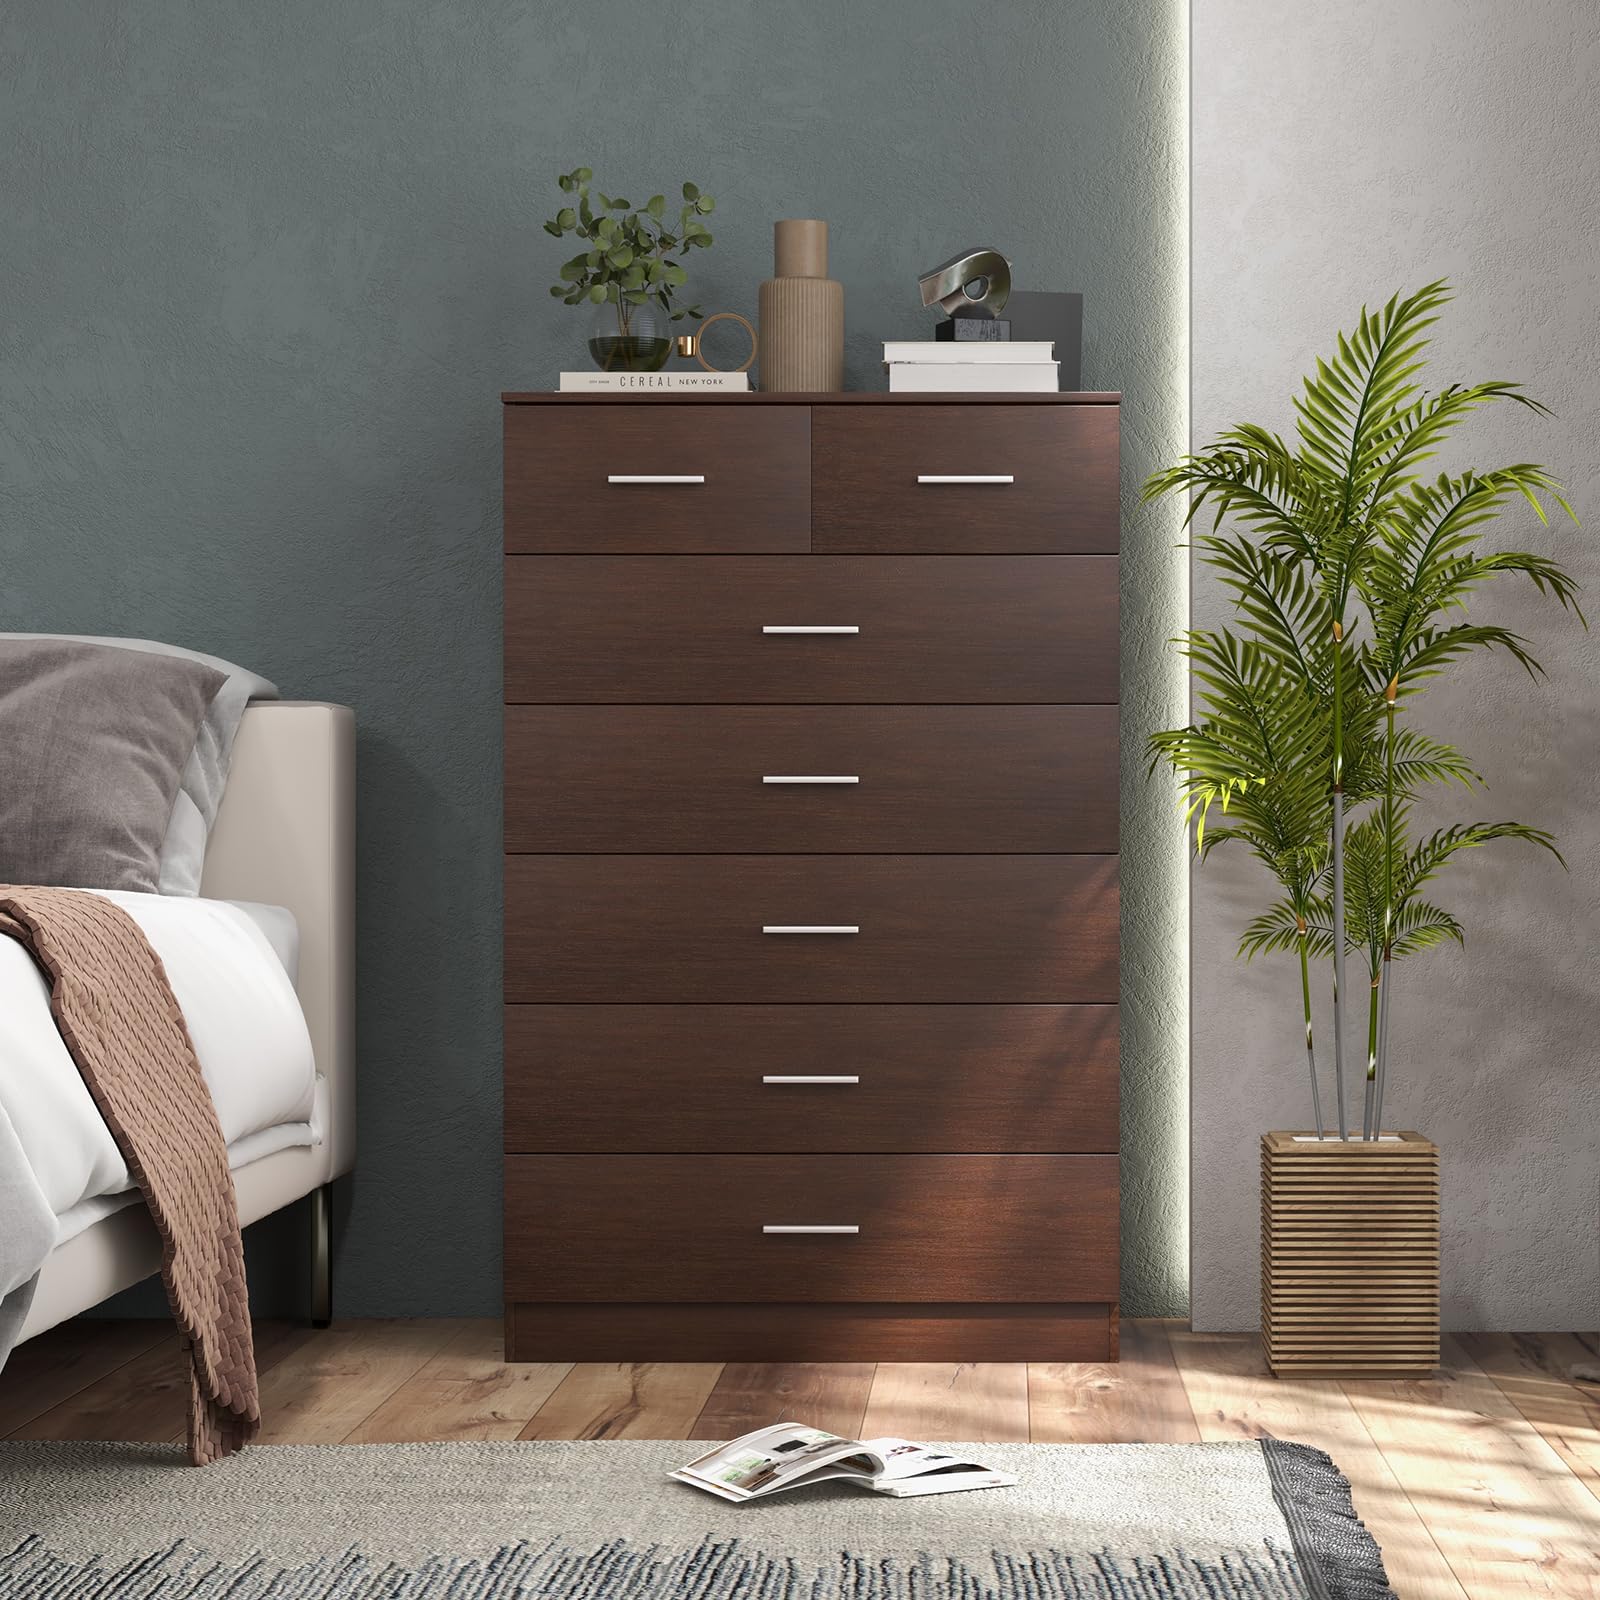 Giantex 7 Drawers Dresser for Bedroom - Wooden Chest of Drawers with Anti-toppling Device